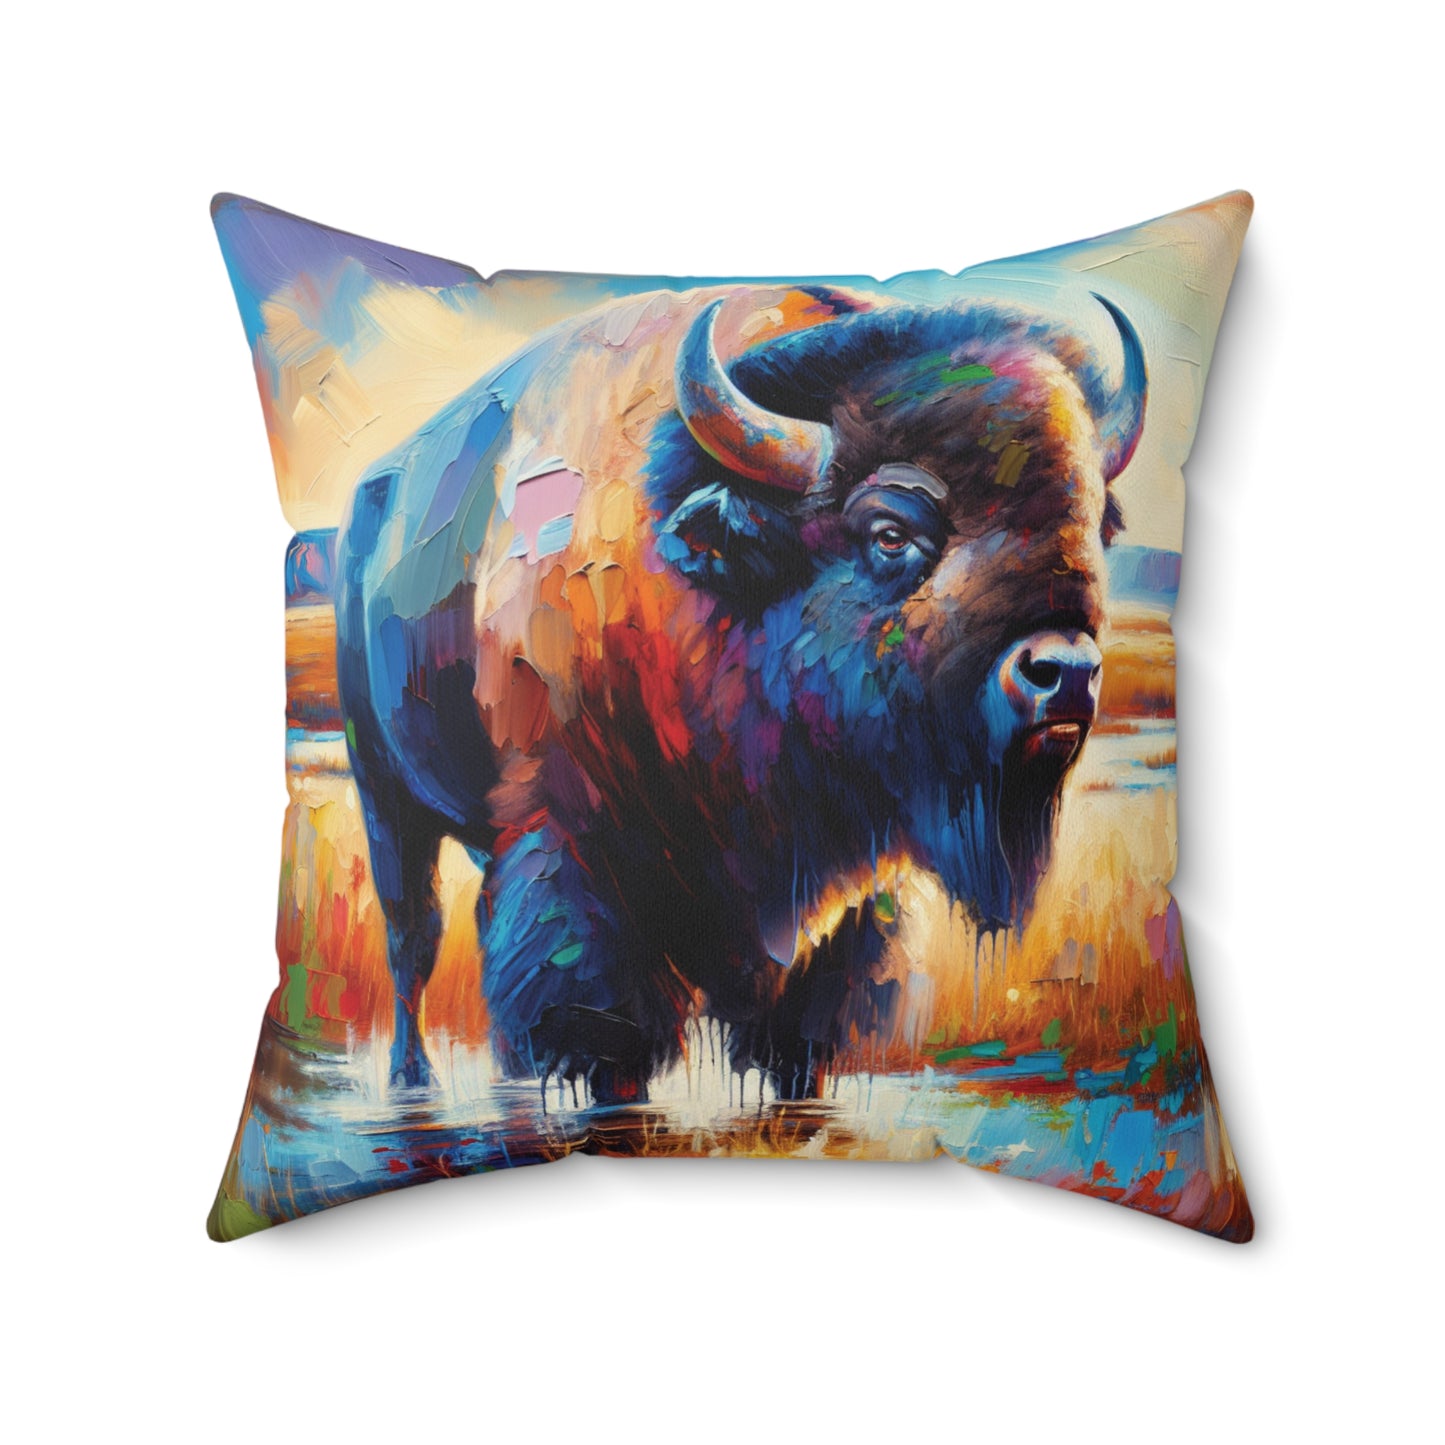 Lone Bison After Rain -  Square Pillows